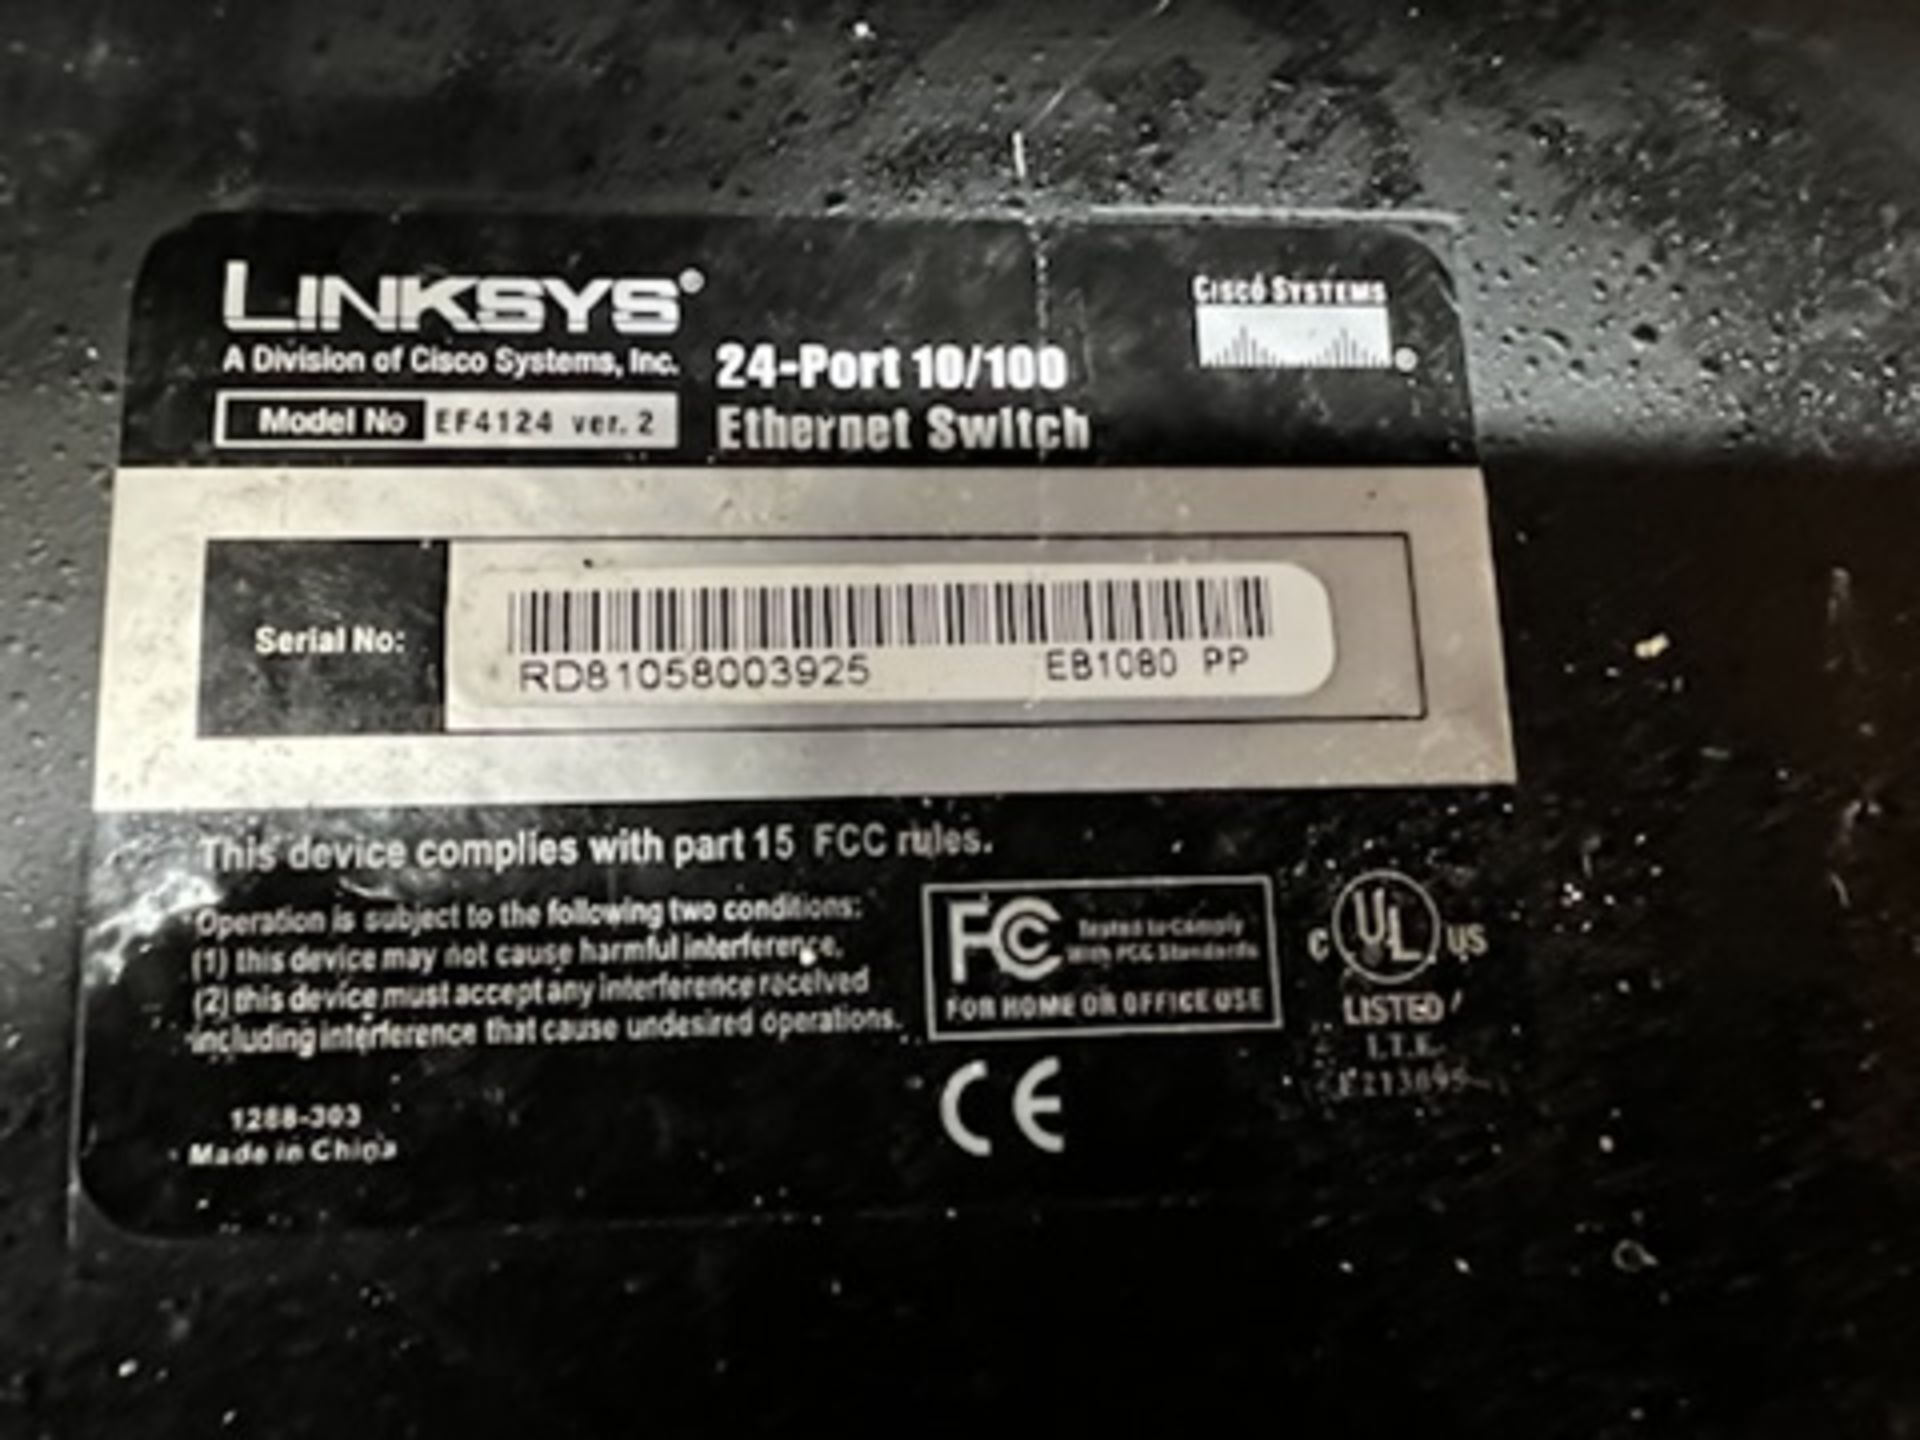 Lot of: (2) Cisco 2500 series routers , (1) Cisco IAD 2400 Series router, (2) Linksys 24-port intern - Image 16 of 18